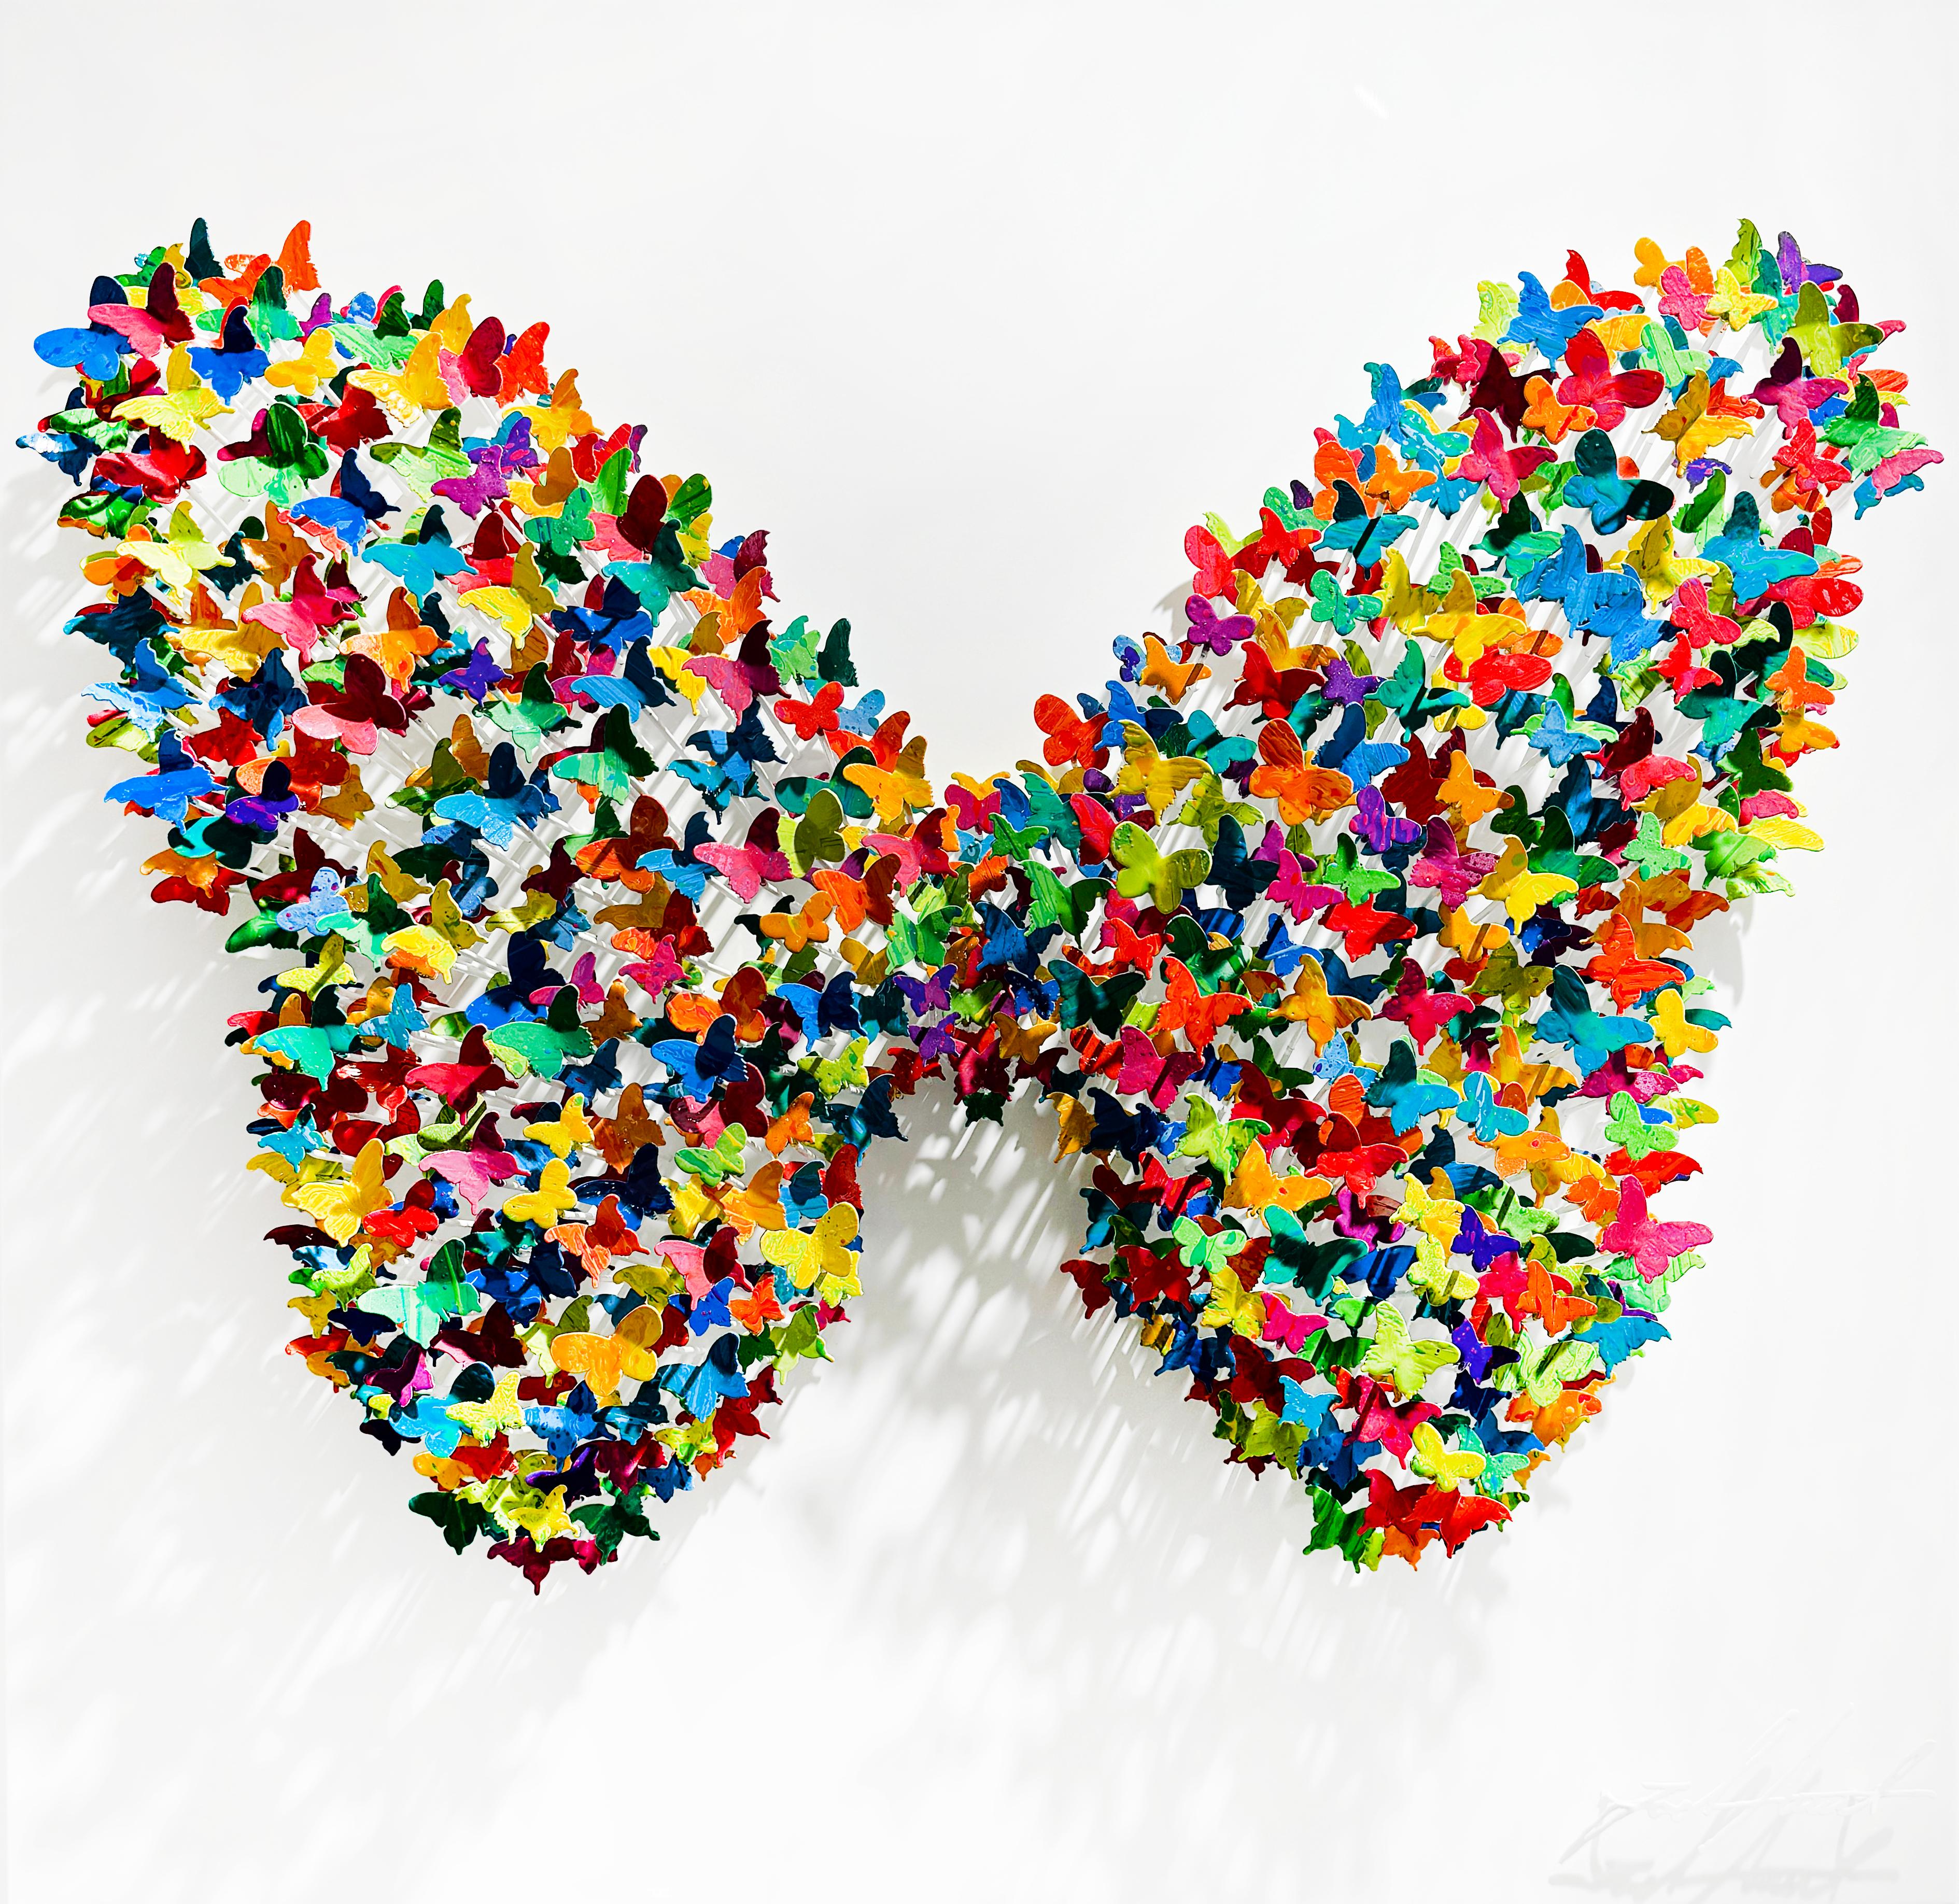 Circle of Life Butterfly - Candy, Mixed Media Metal Wall Sculpture - Mixed Media Art by Joel Amit